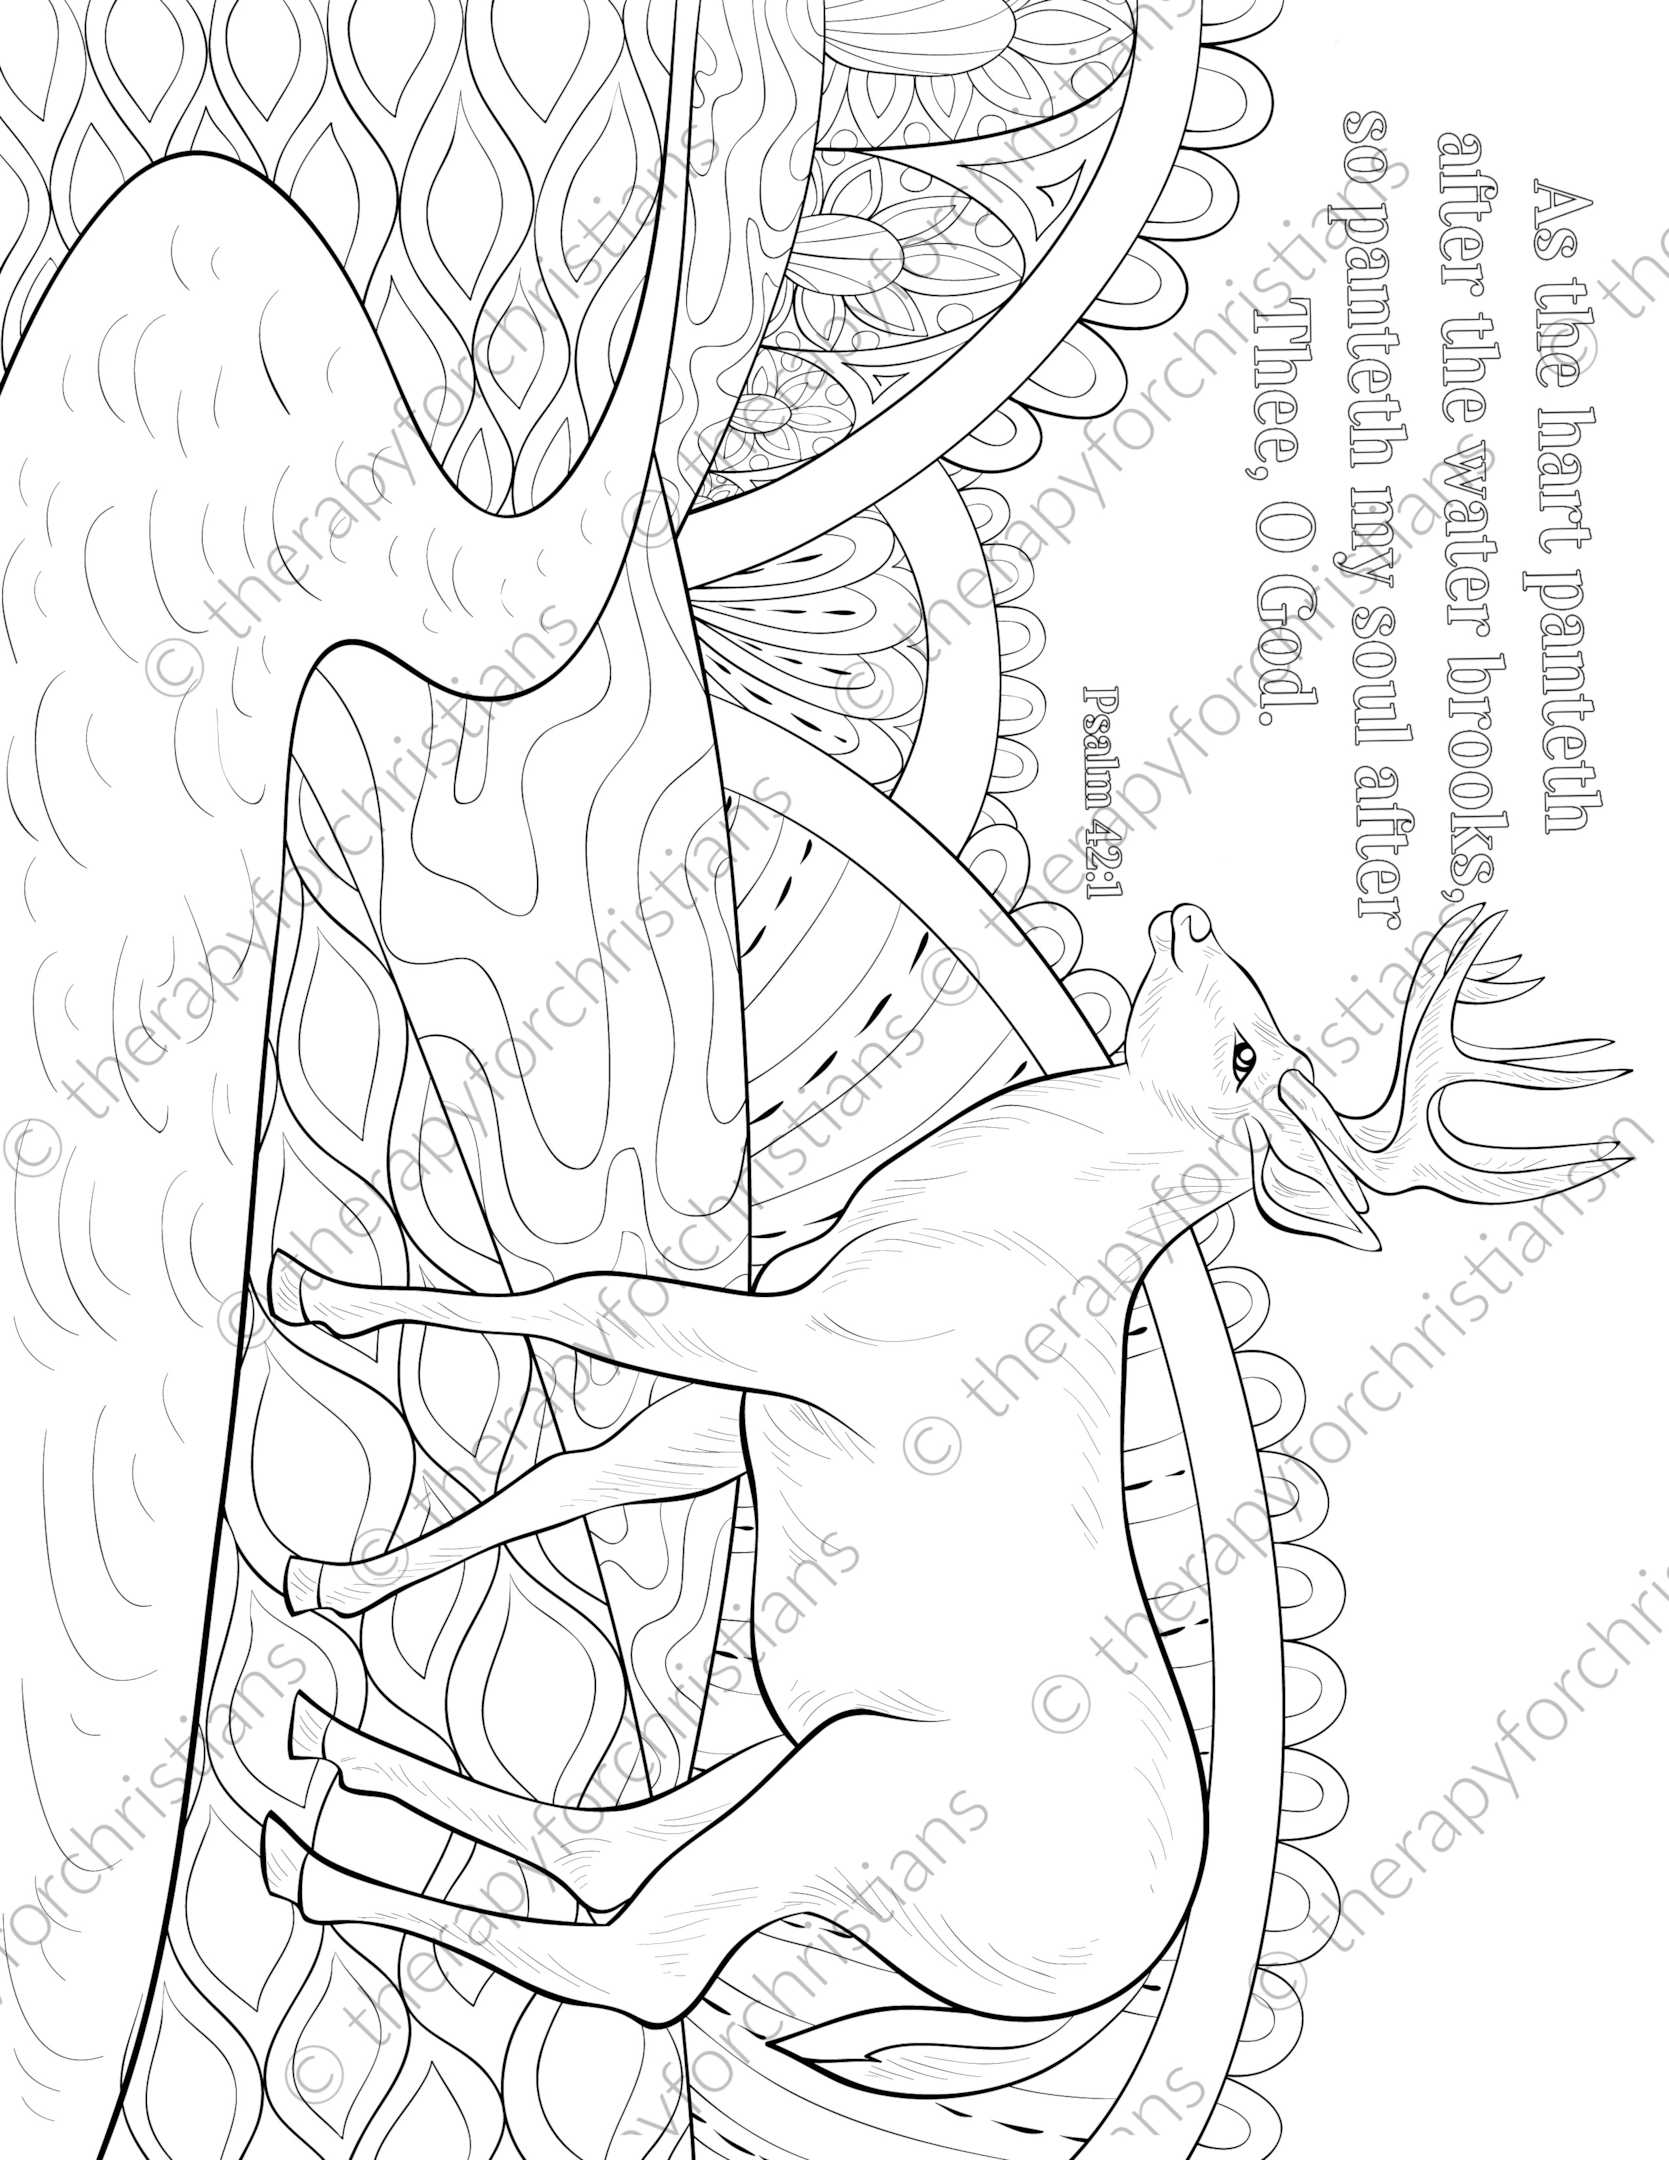 Psalm 42:1 Coloring pages for adults 